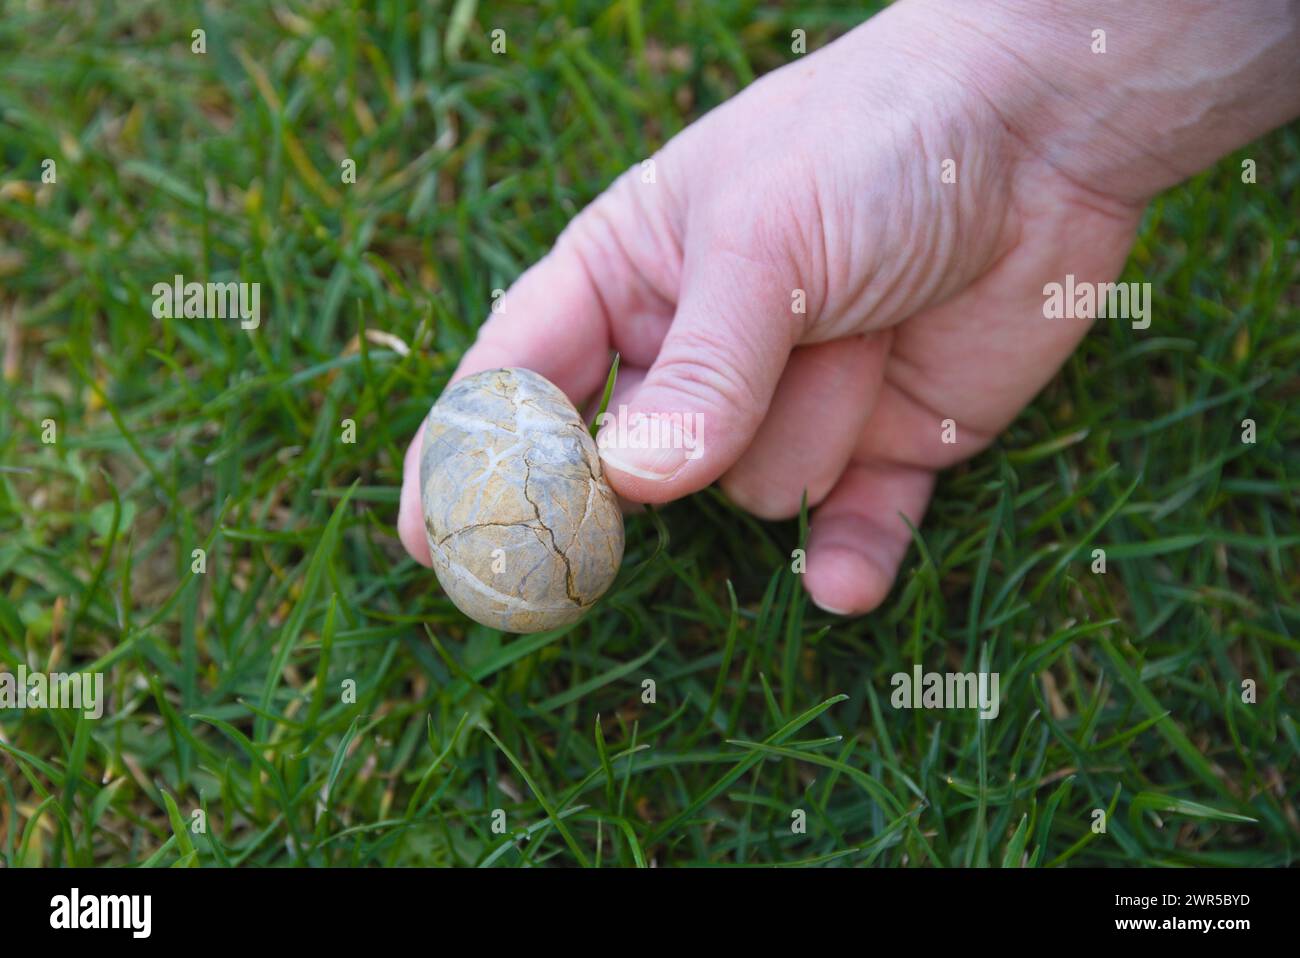 Easter Egg Made Of Stone With Cracks And Fissures In The Hand Stock Photo